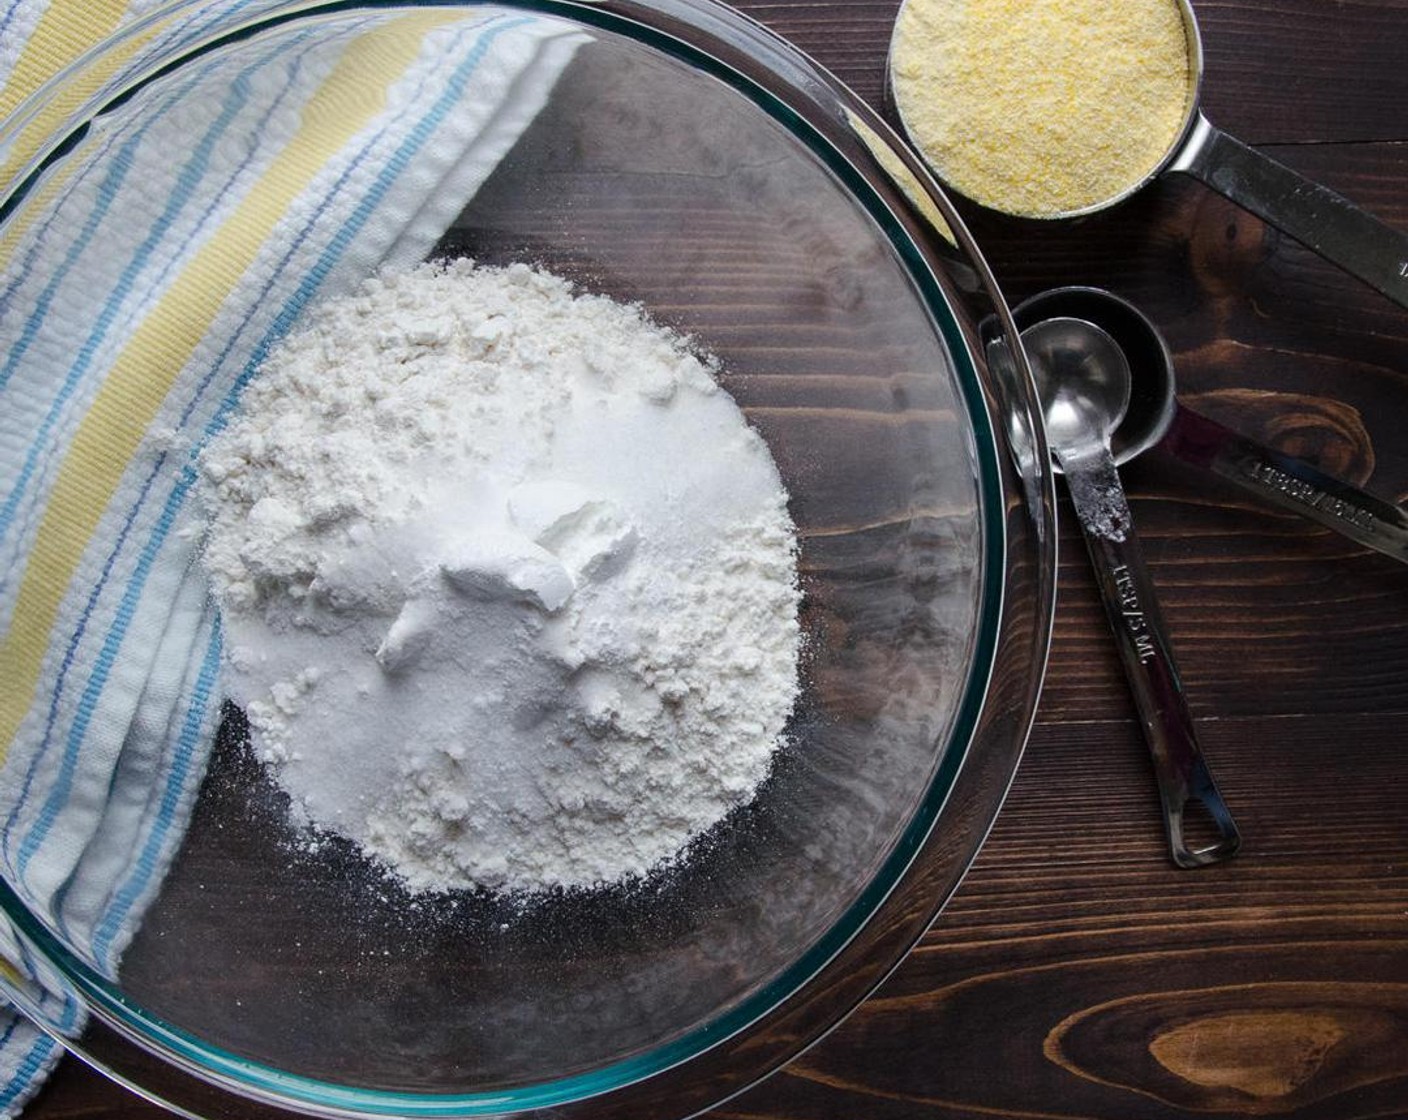 step 1 In a large bowl, whisk together the All-Purpose Flour (1 1/2 cups), Cornmeal (1/2 cup), Granulated Sugar (1 Tbsp), Baking Powder (1/2 Tbsp), and Salt (3/4 tsp).